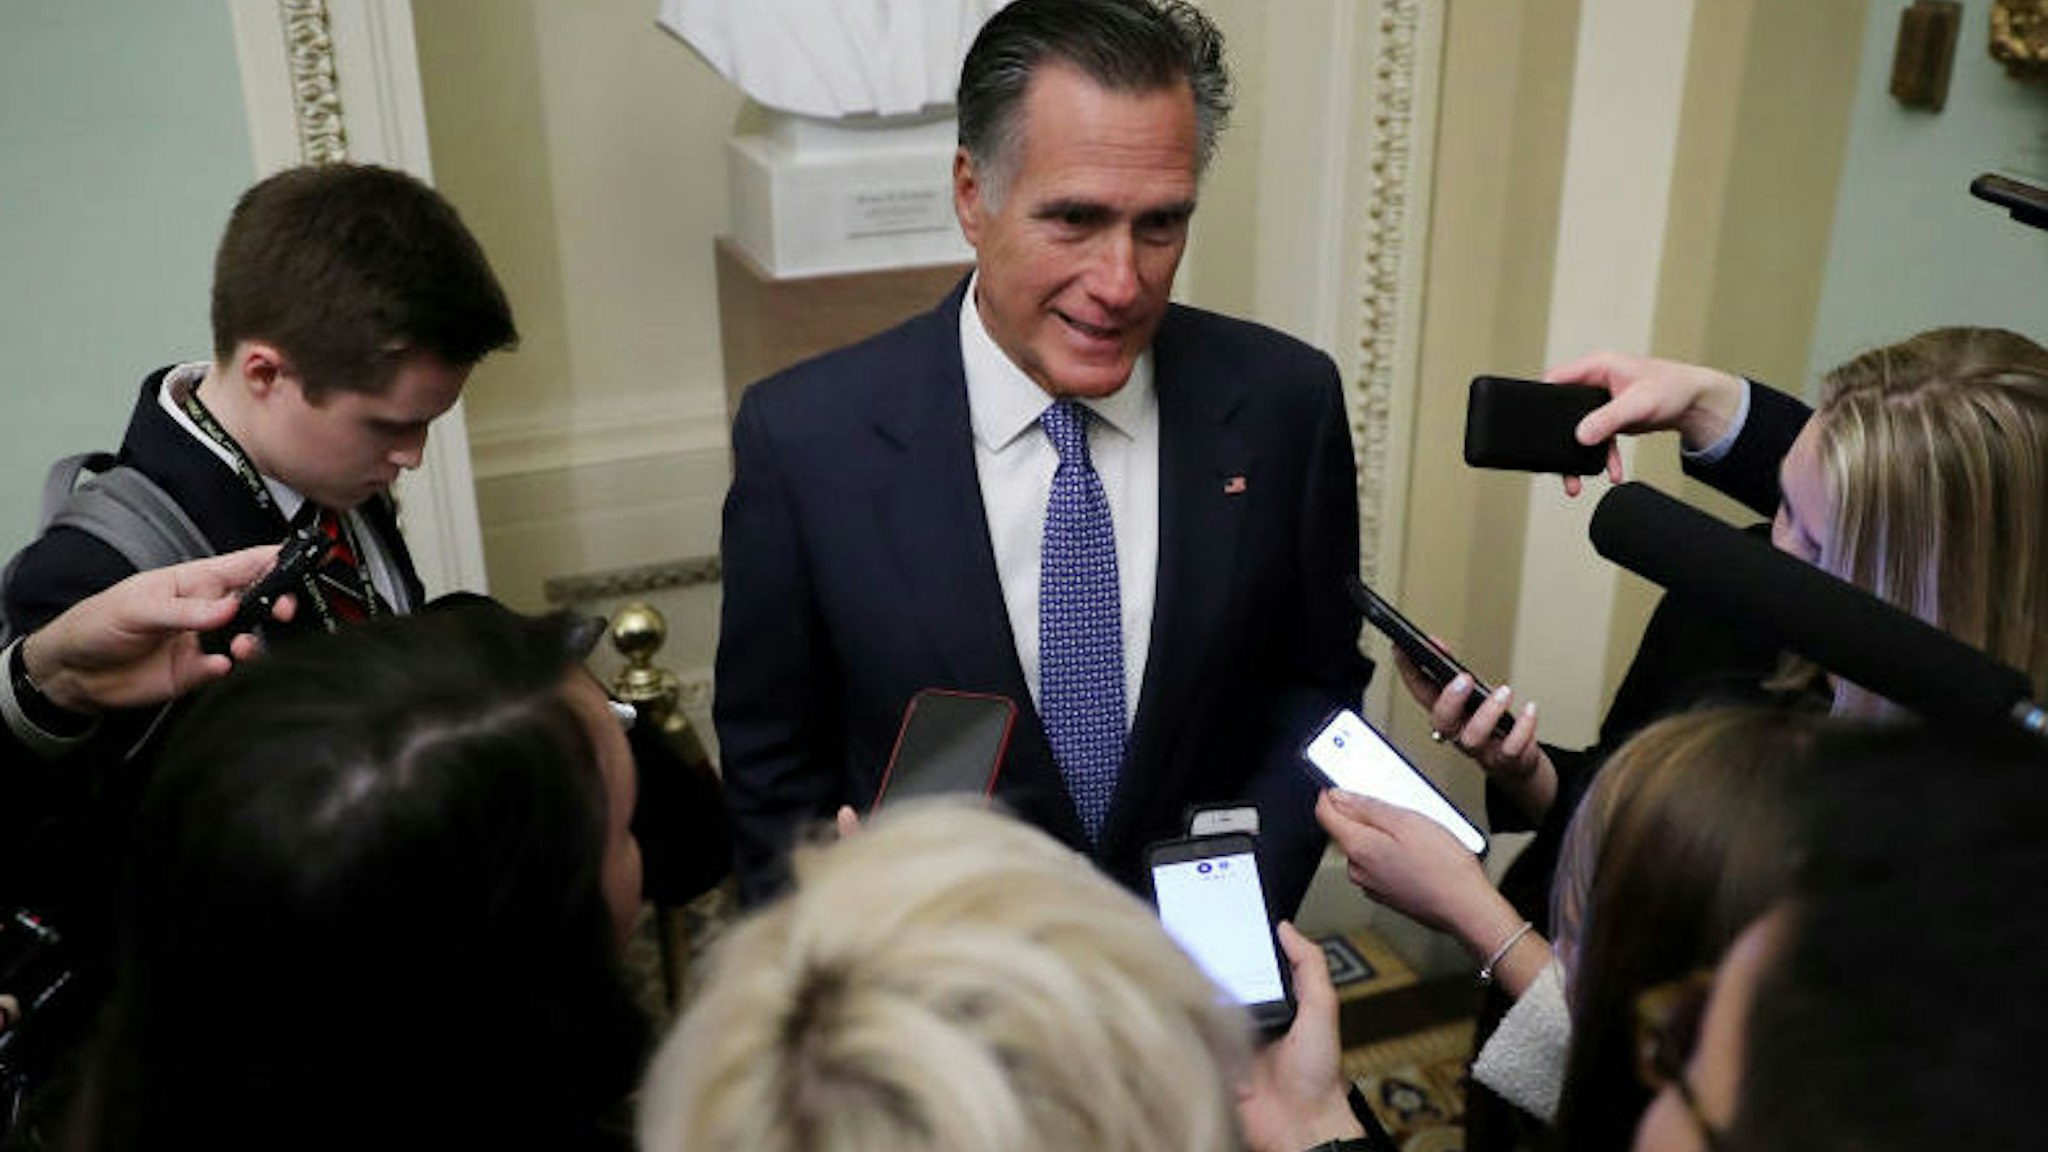 WASHINGTON, DC - JANUARY 21: Sen. Mitt Romney (R-UT) talks to reporters before heading into the weekly Senate Republican policy luncheon at the U.S. Capitol January 21, 2020 in Washington, DC. Senators will vote Tuesday on the rules for President Donald Trump's impeachment trial, which is expected to last three to five weeks.